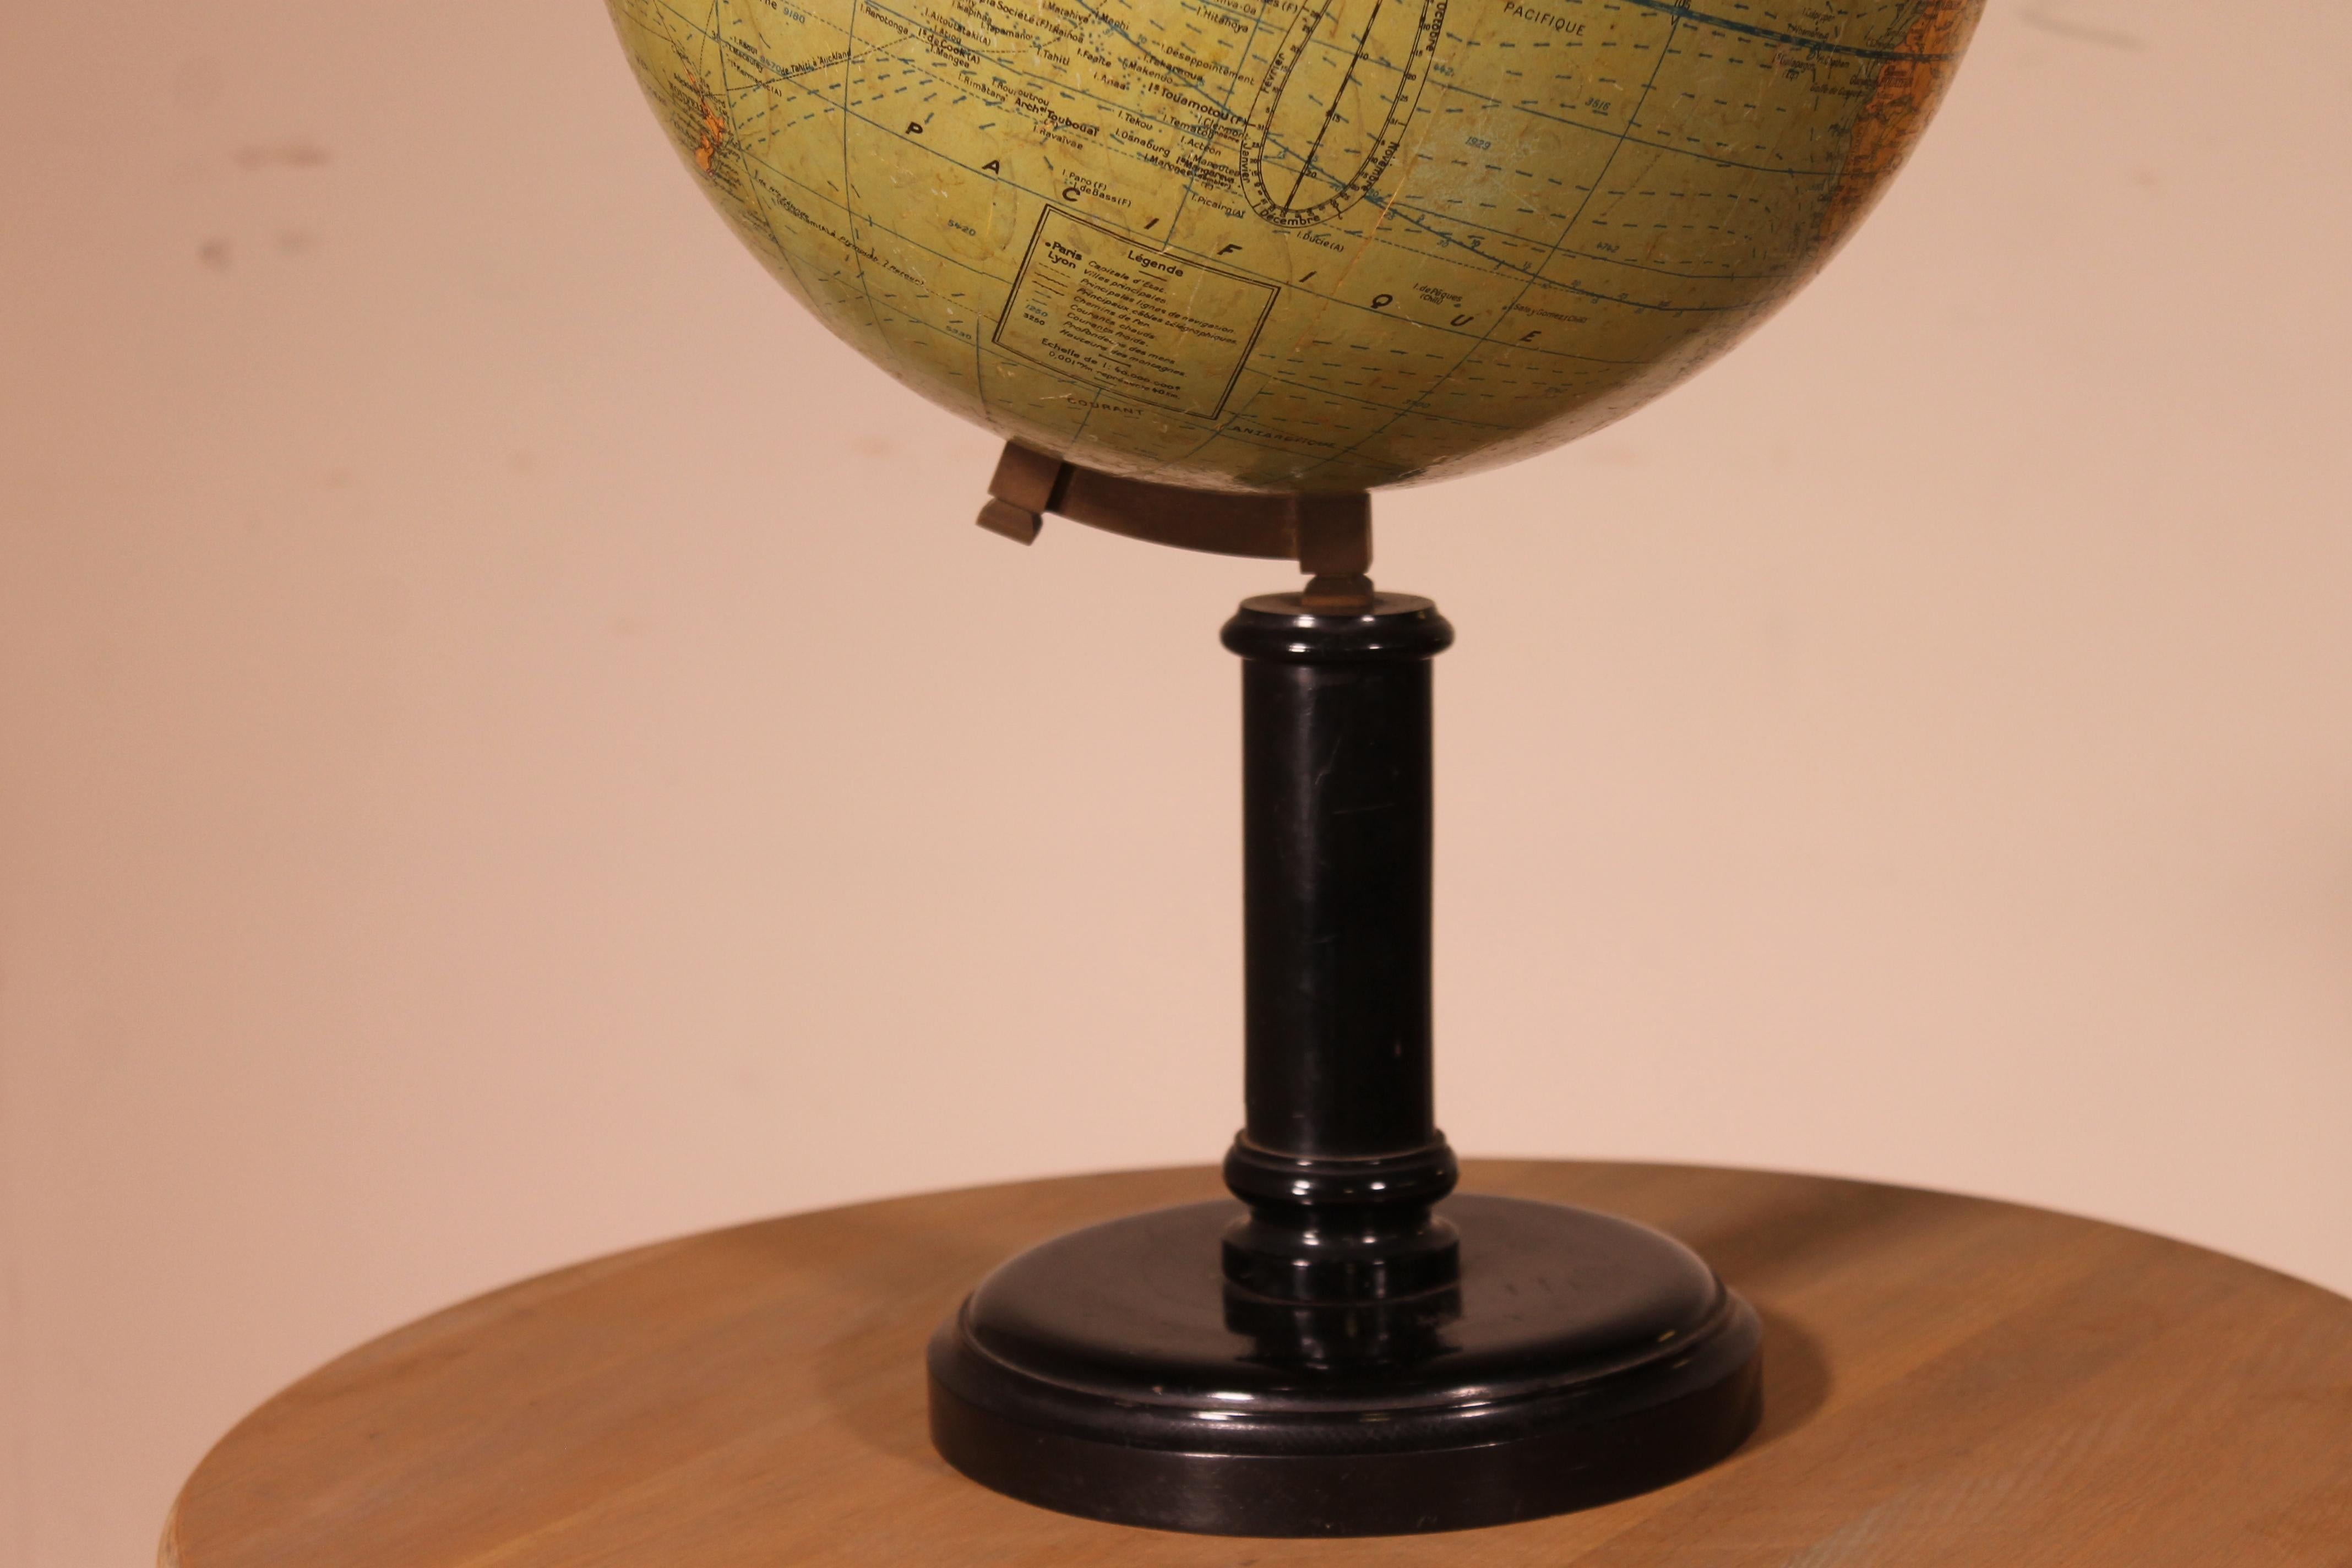 French world globe produced by the publisher G. Thomas 44 rue ND des Champs in Paris, circa 1900
The globe is carton and colored paper.

Beautiful patina and good condition.
Some traces of wear.

          